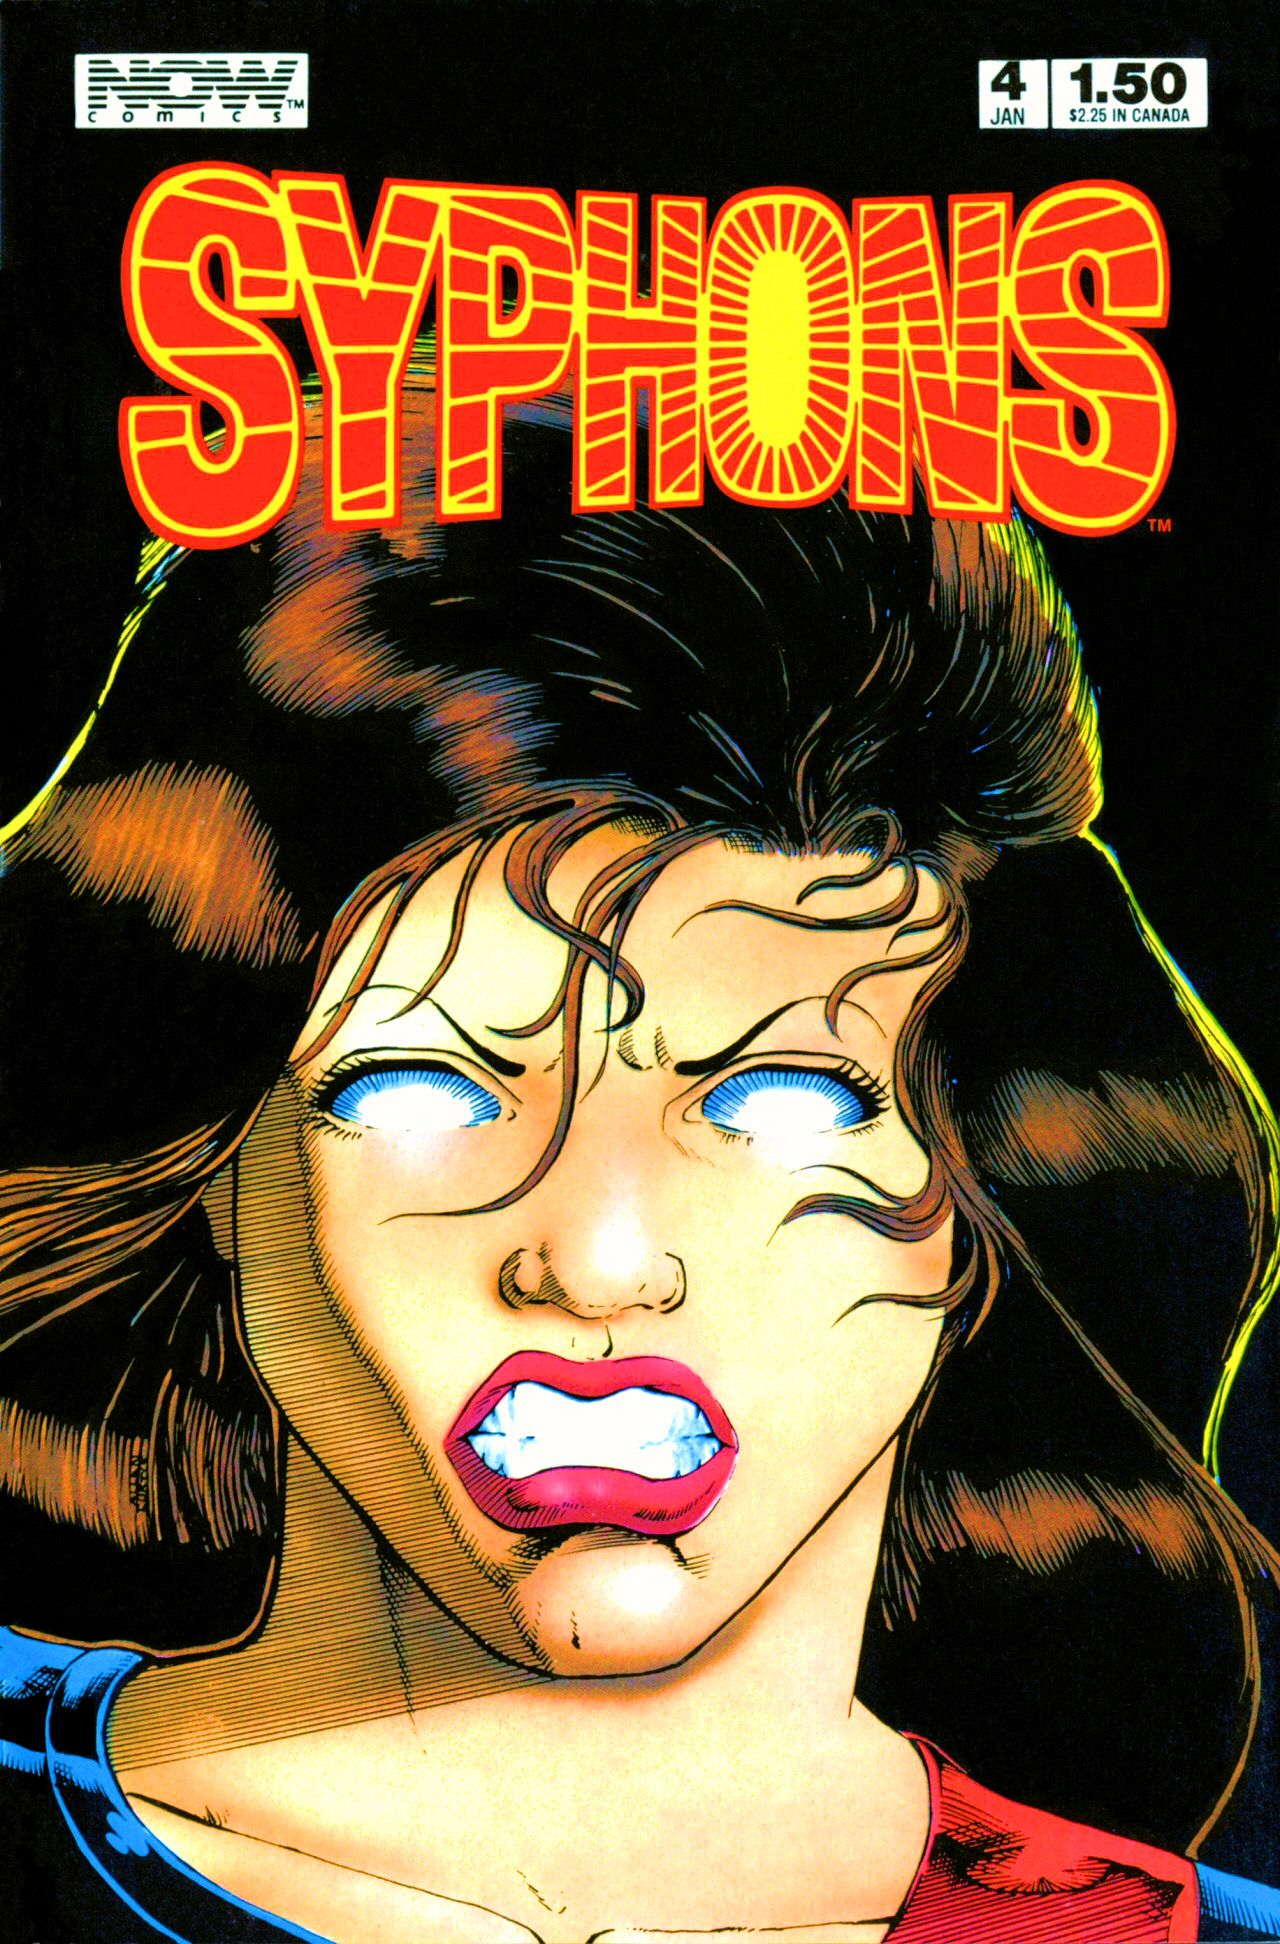 Read online Syphons comic -  Issue #4 - 1